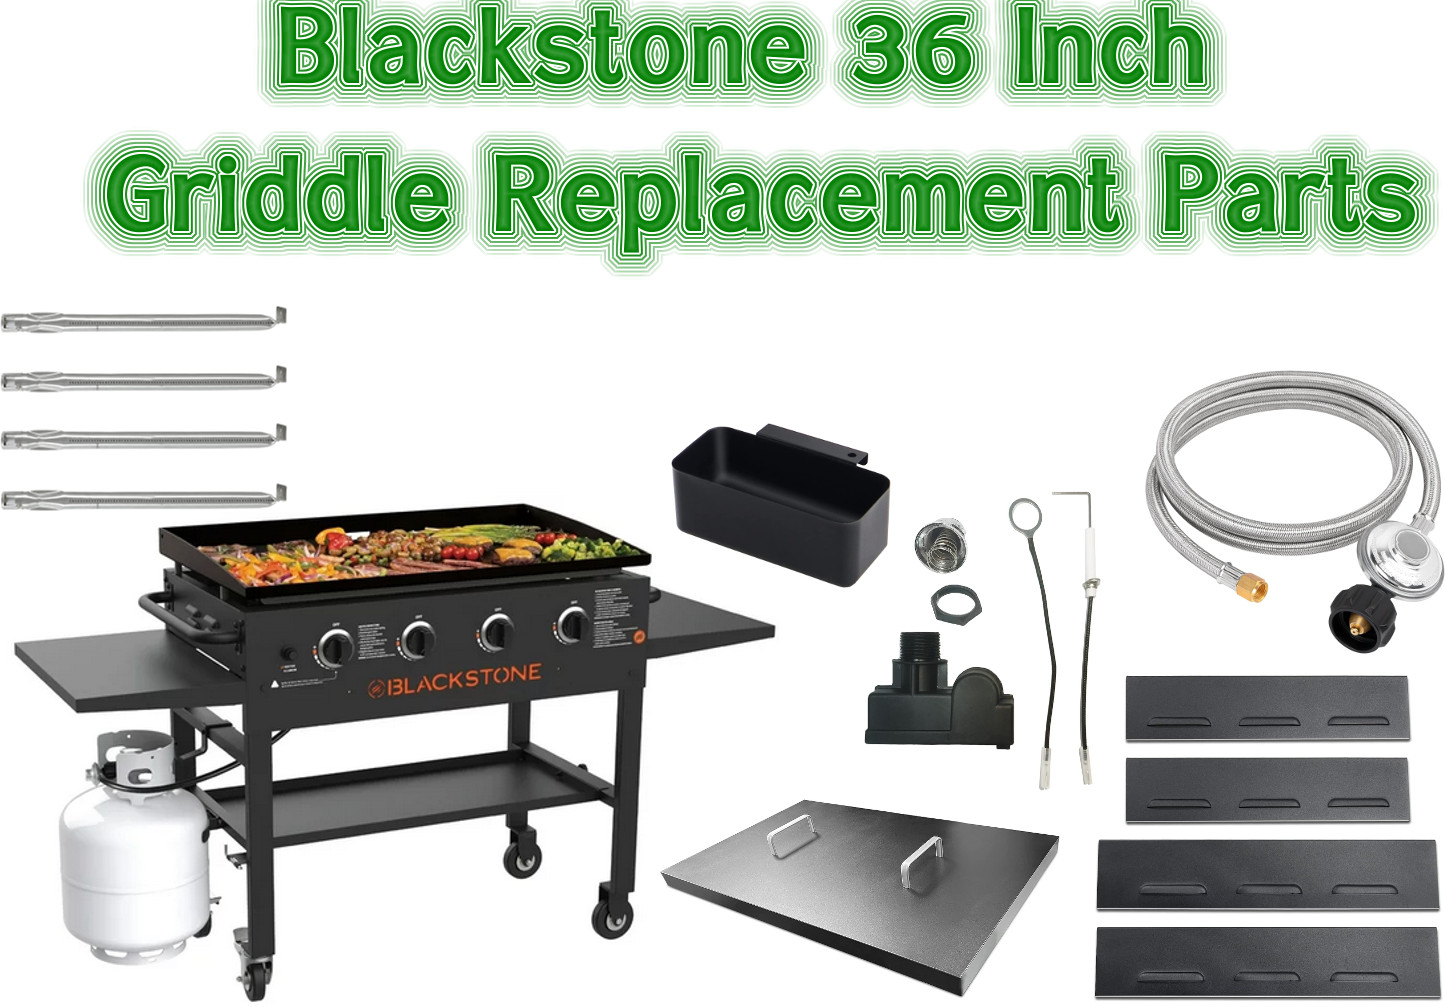 blackstone 36 inch griddle replacement parts